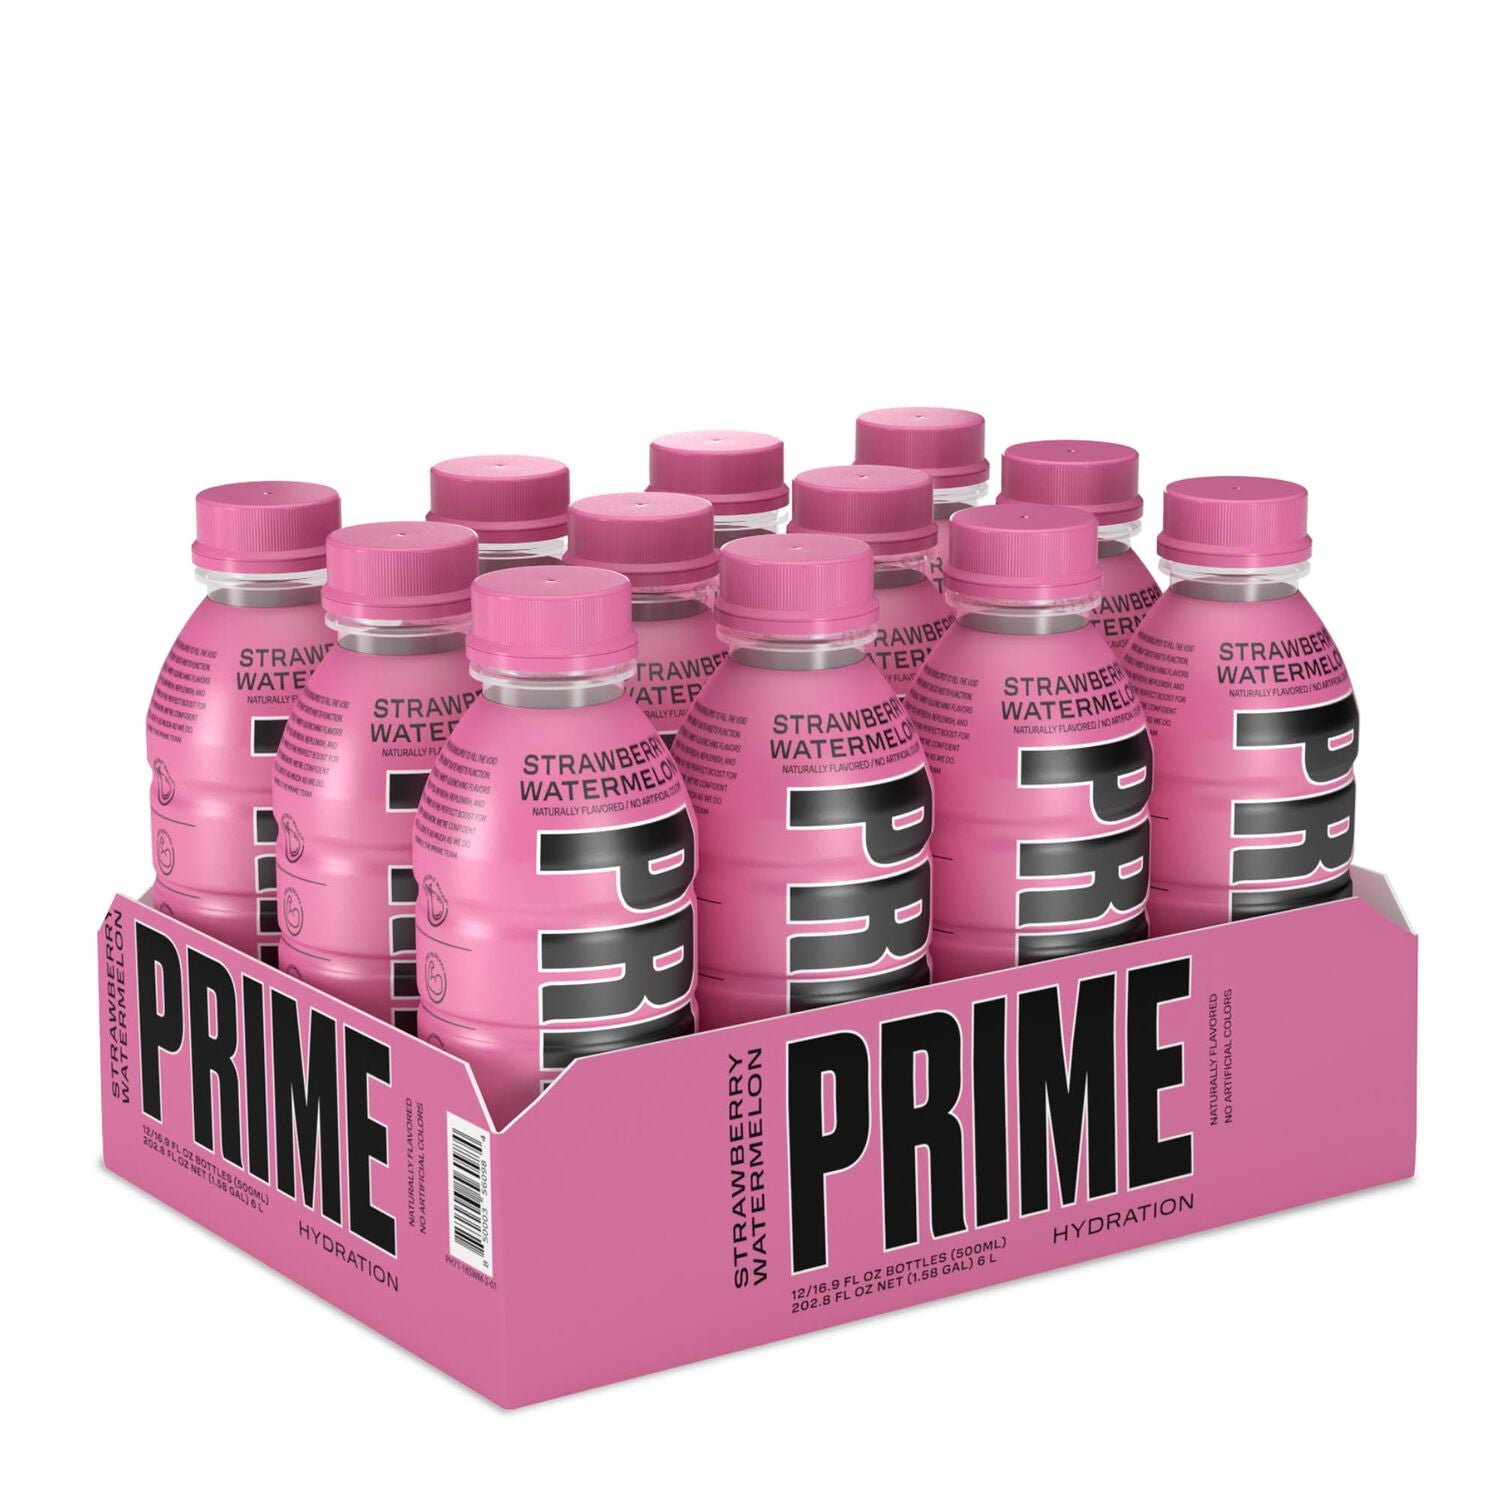 12 pack of Strawberry Watermelon Prime